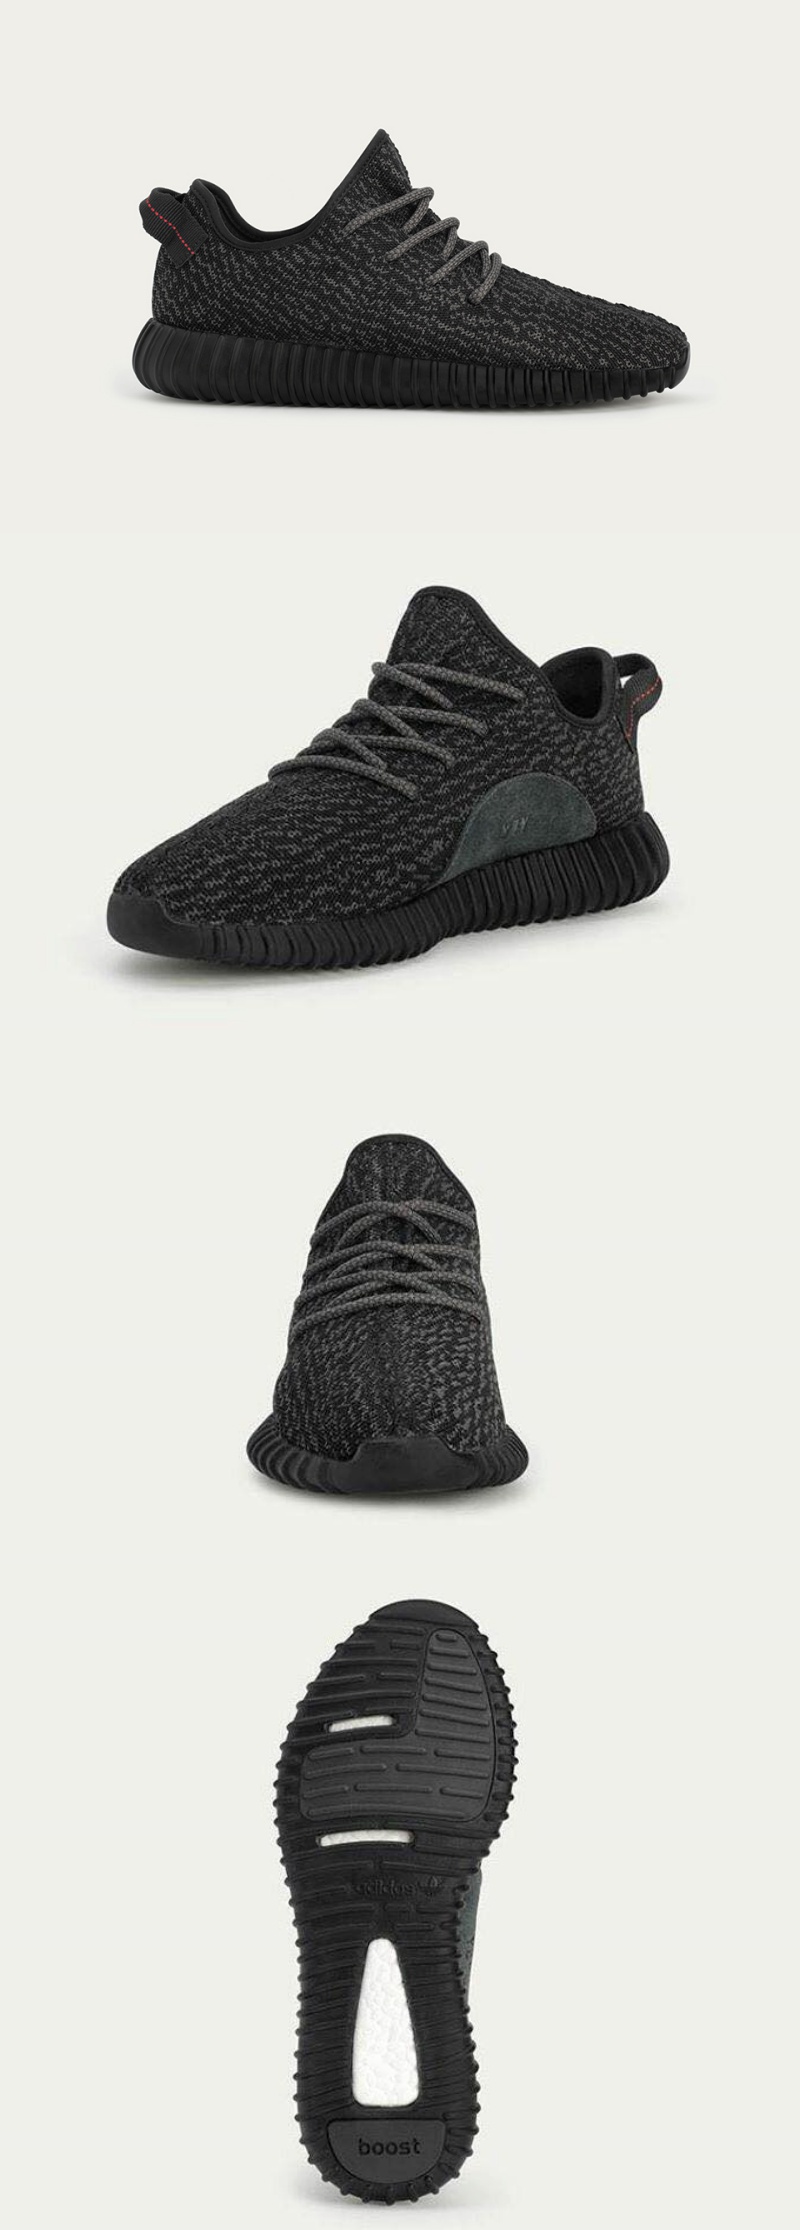 adidas-originals-officially-announces-the-yeezy-boost-350-black-05-down